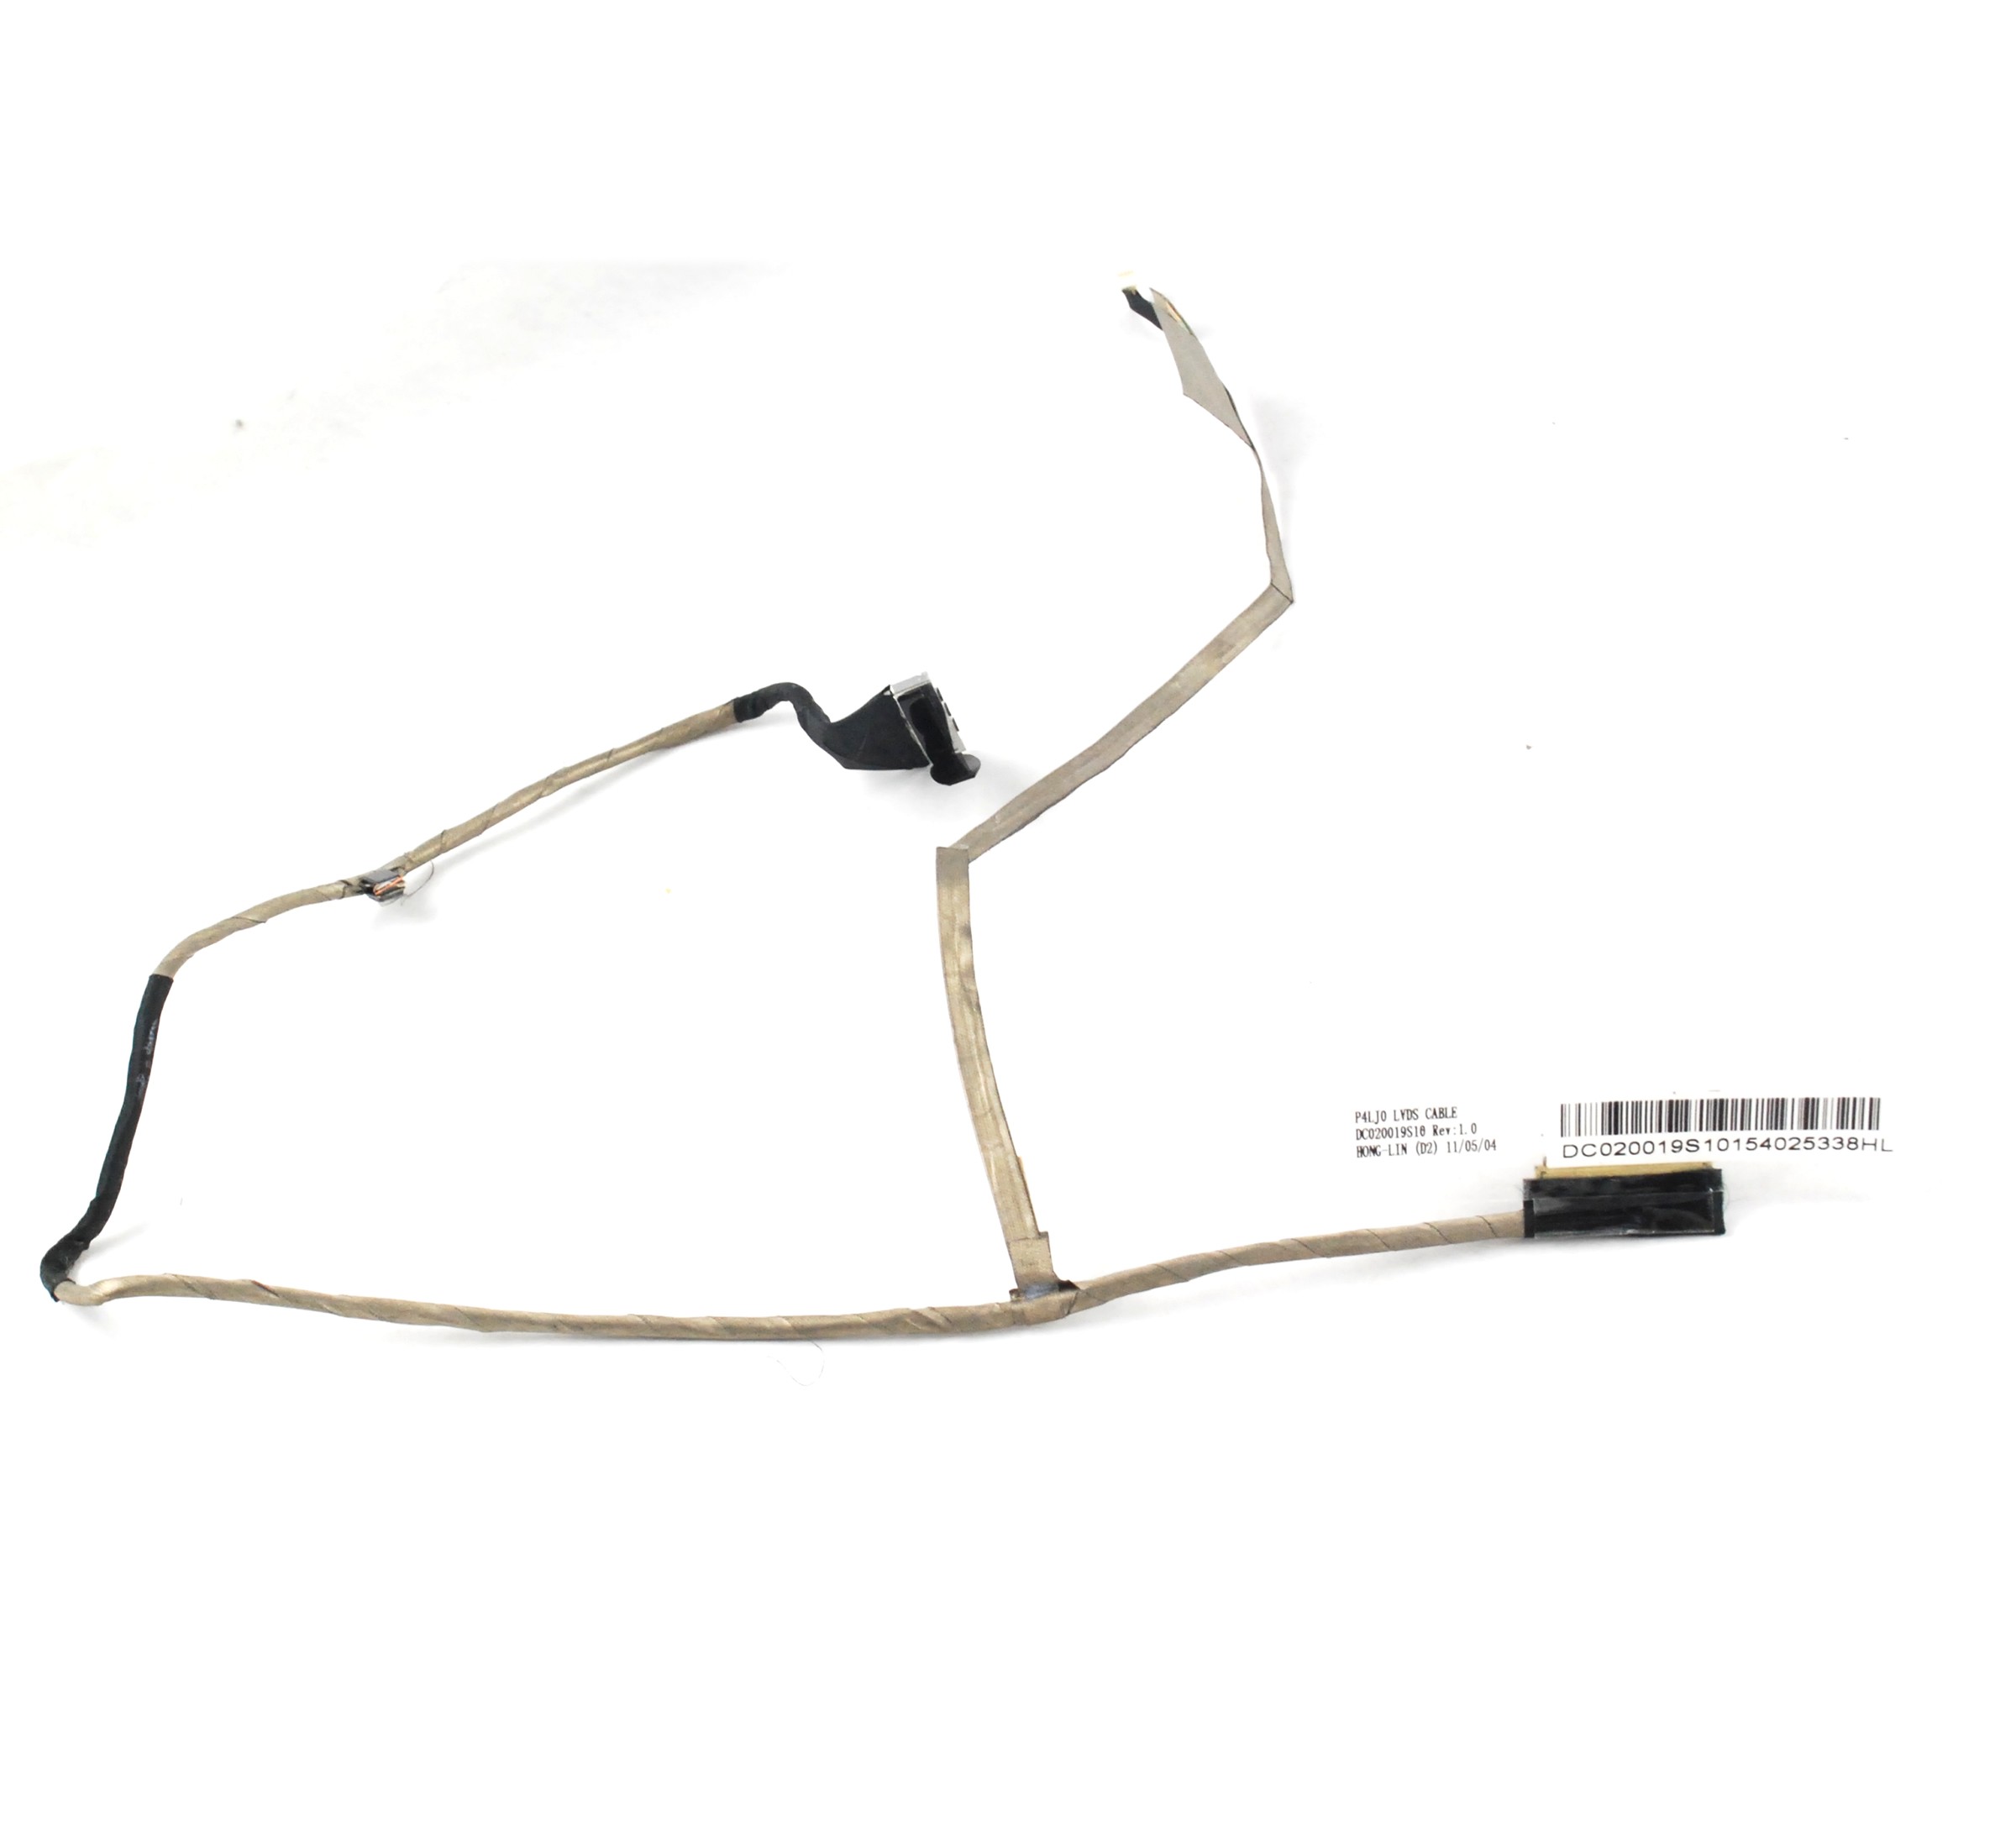 ACER ASPIRE 4830T 4830TG  LCD CABLE DC020019S10